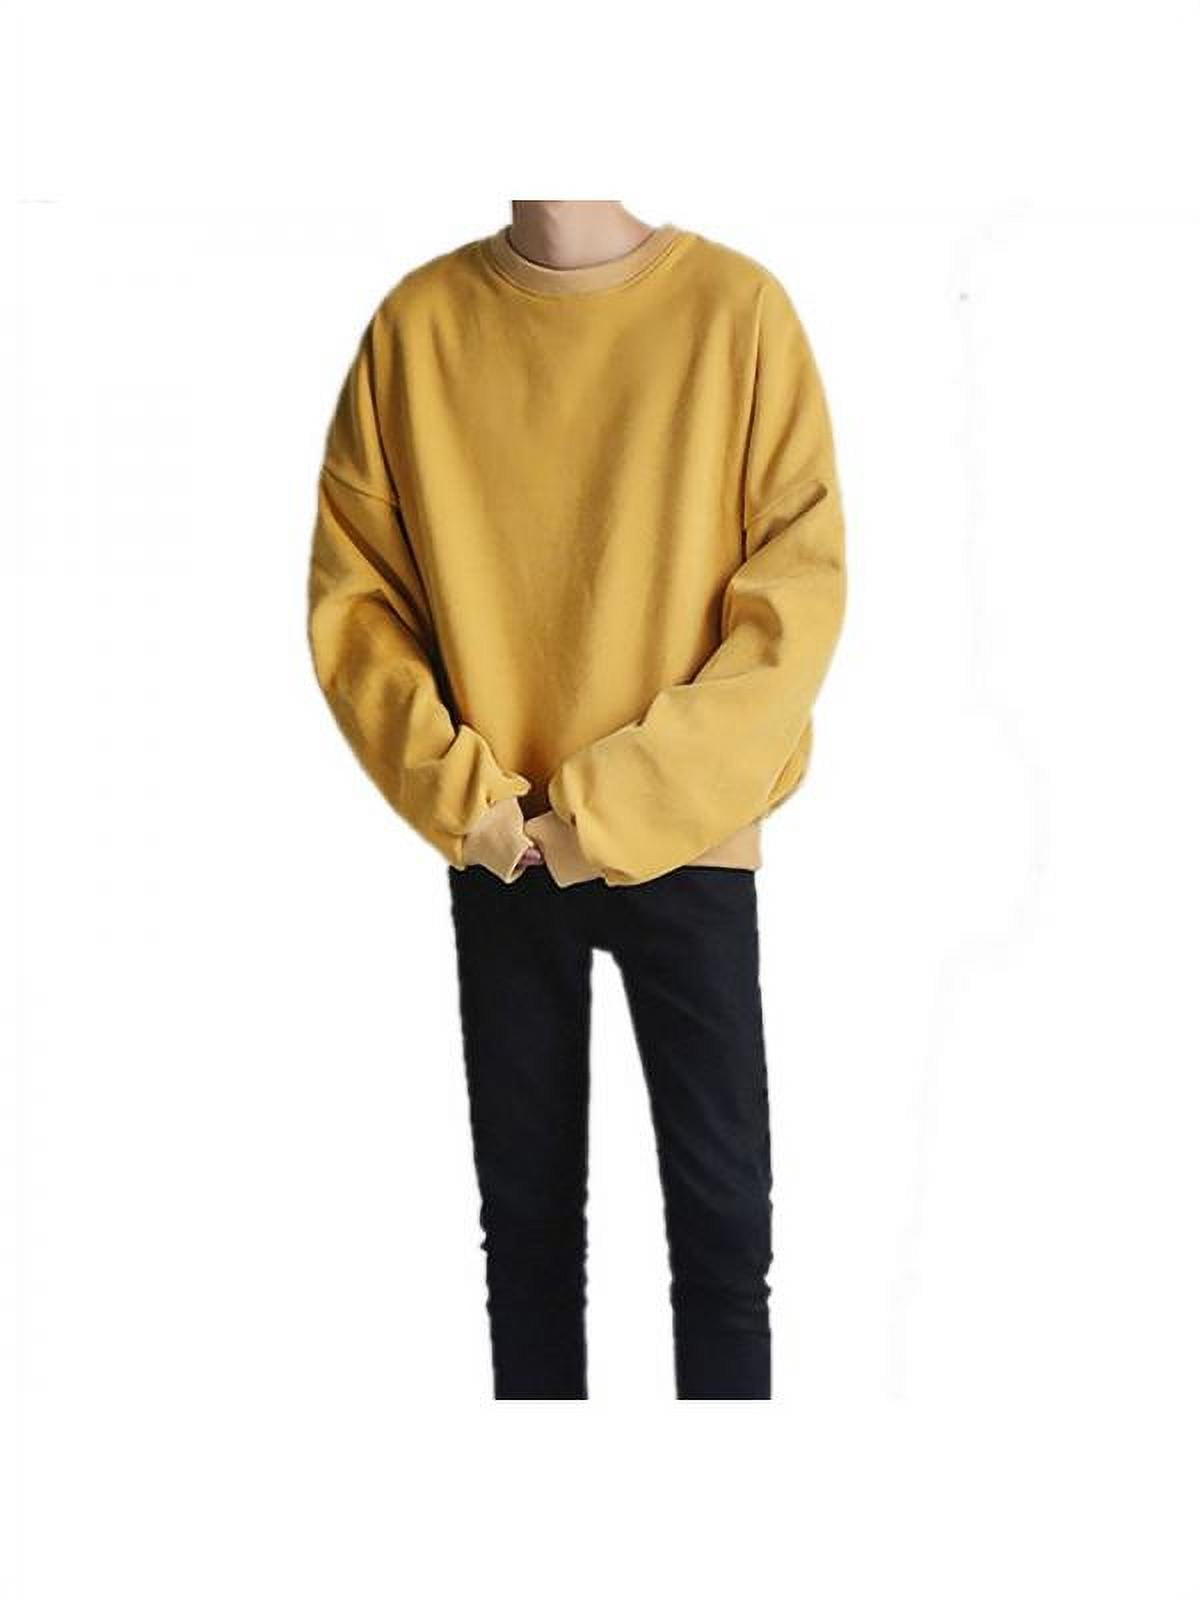 BYWX Men Knit Crew Neck Solid Color Long Sleeve Loose Fit Pullover Sweater